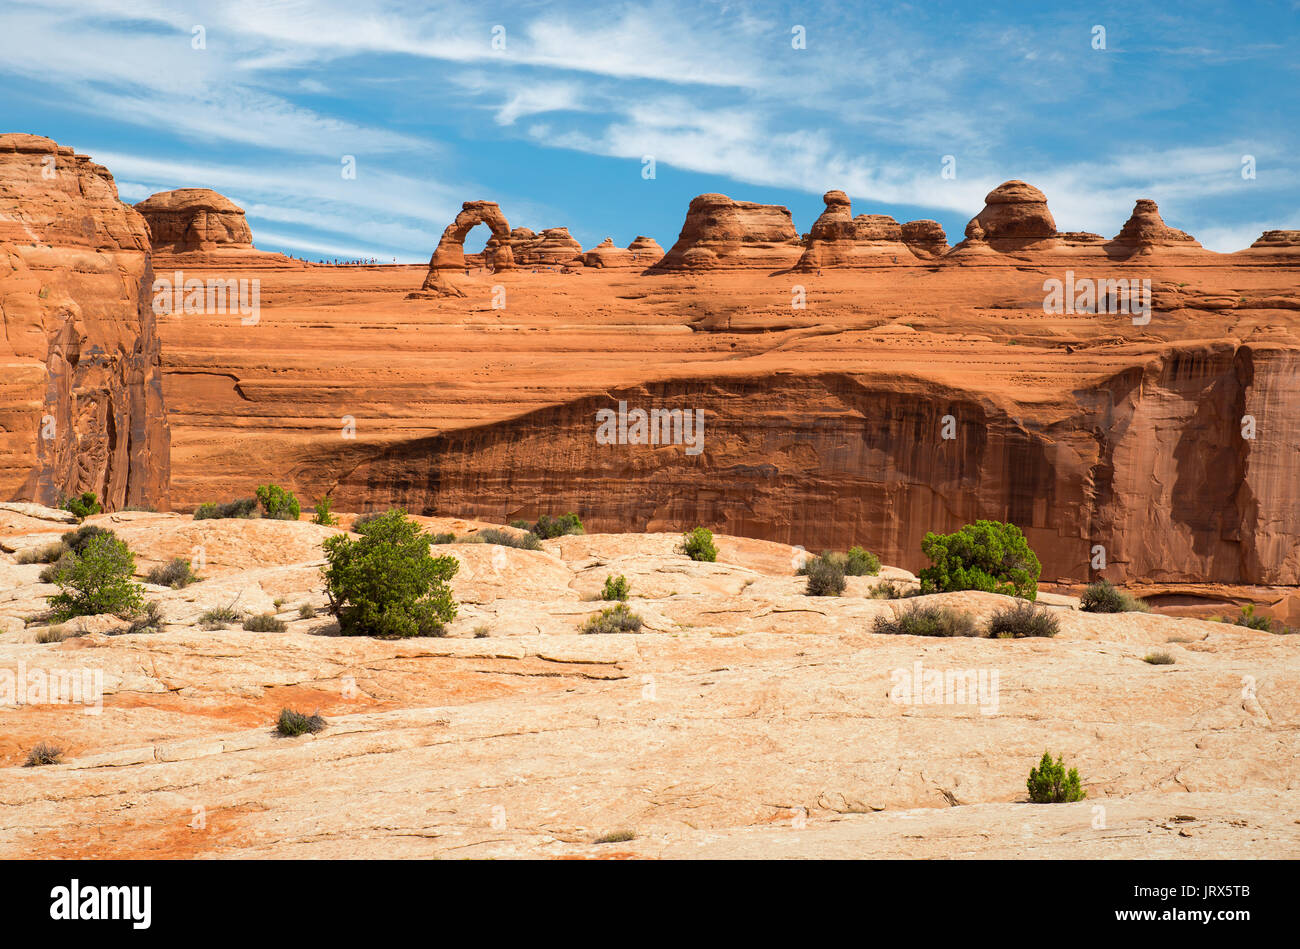 Landscape of rock erosion and arches inside Arches national park near Moab in the state of Utah, USA. Stock Photo